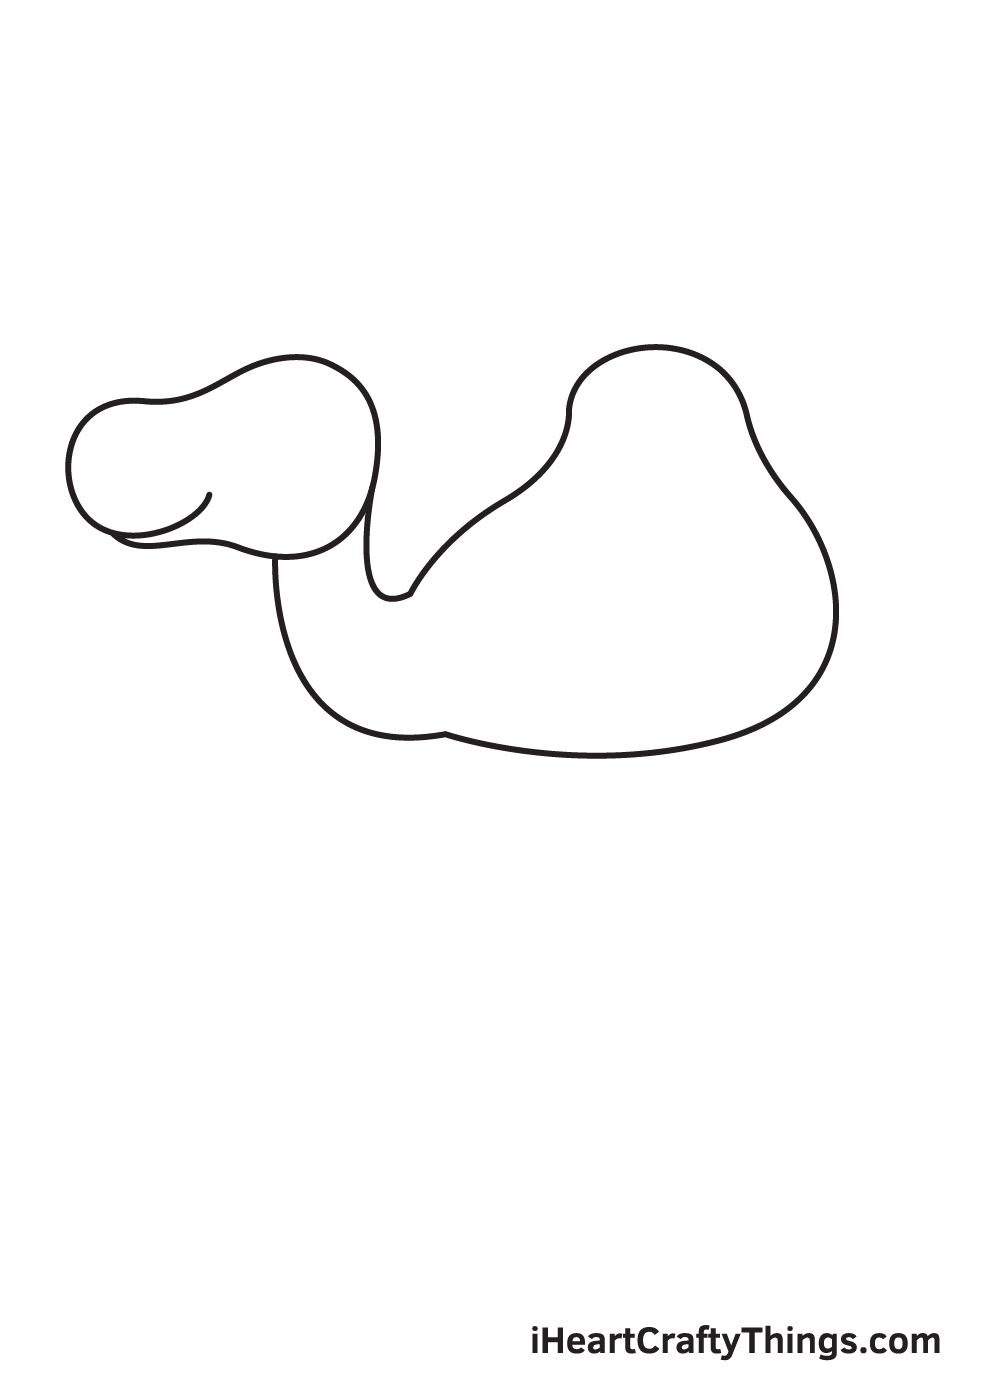 camel drawing step 2